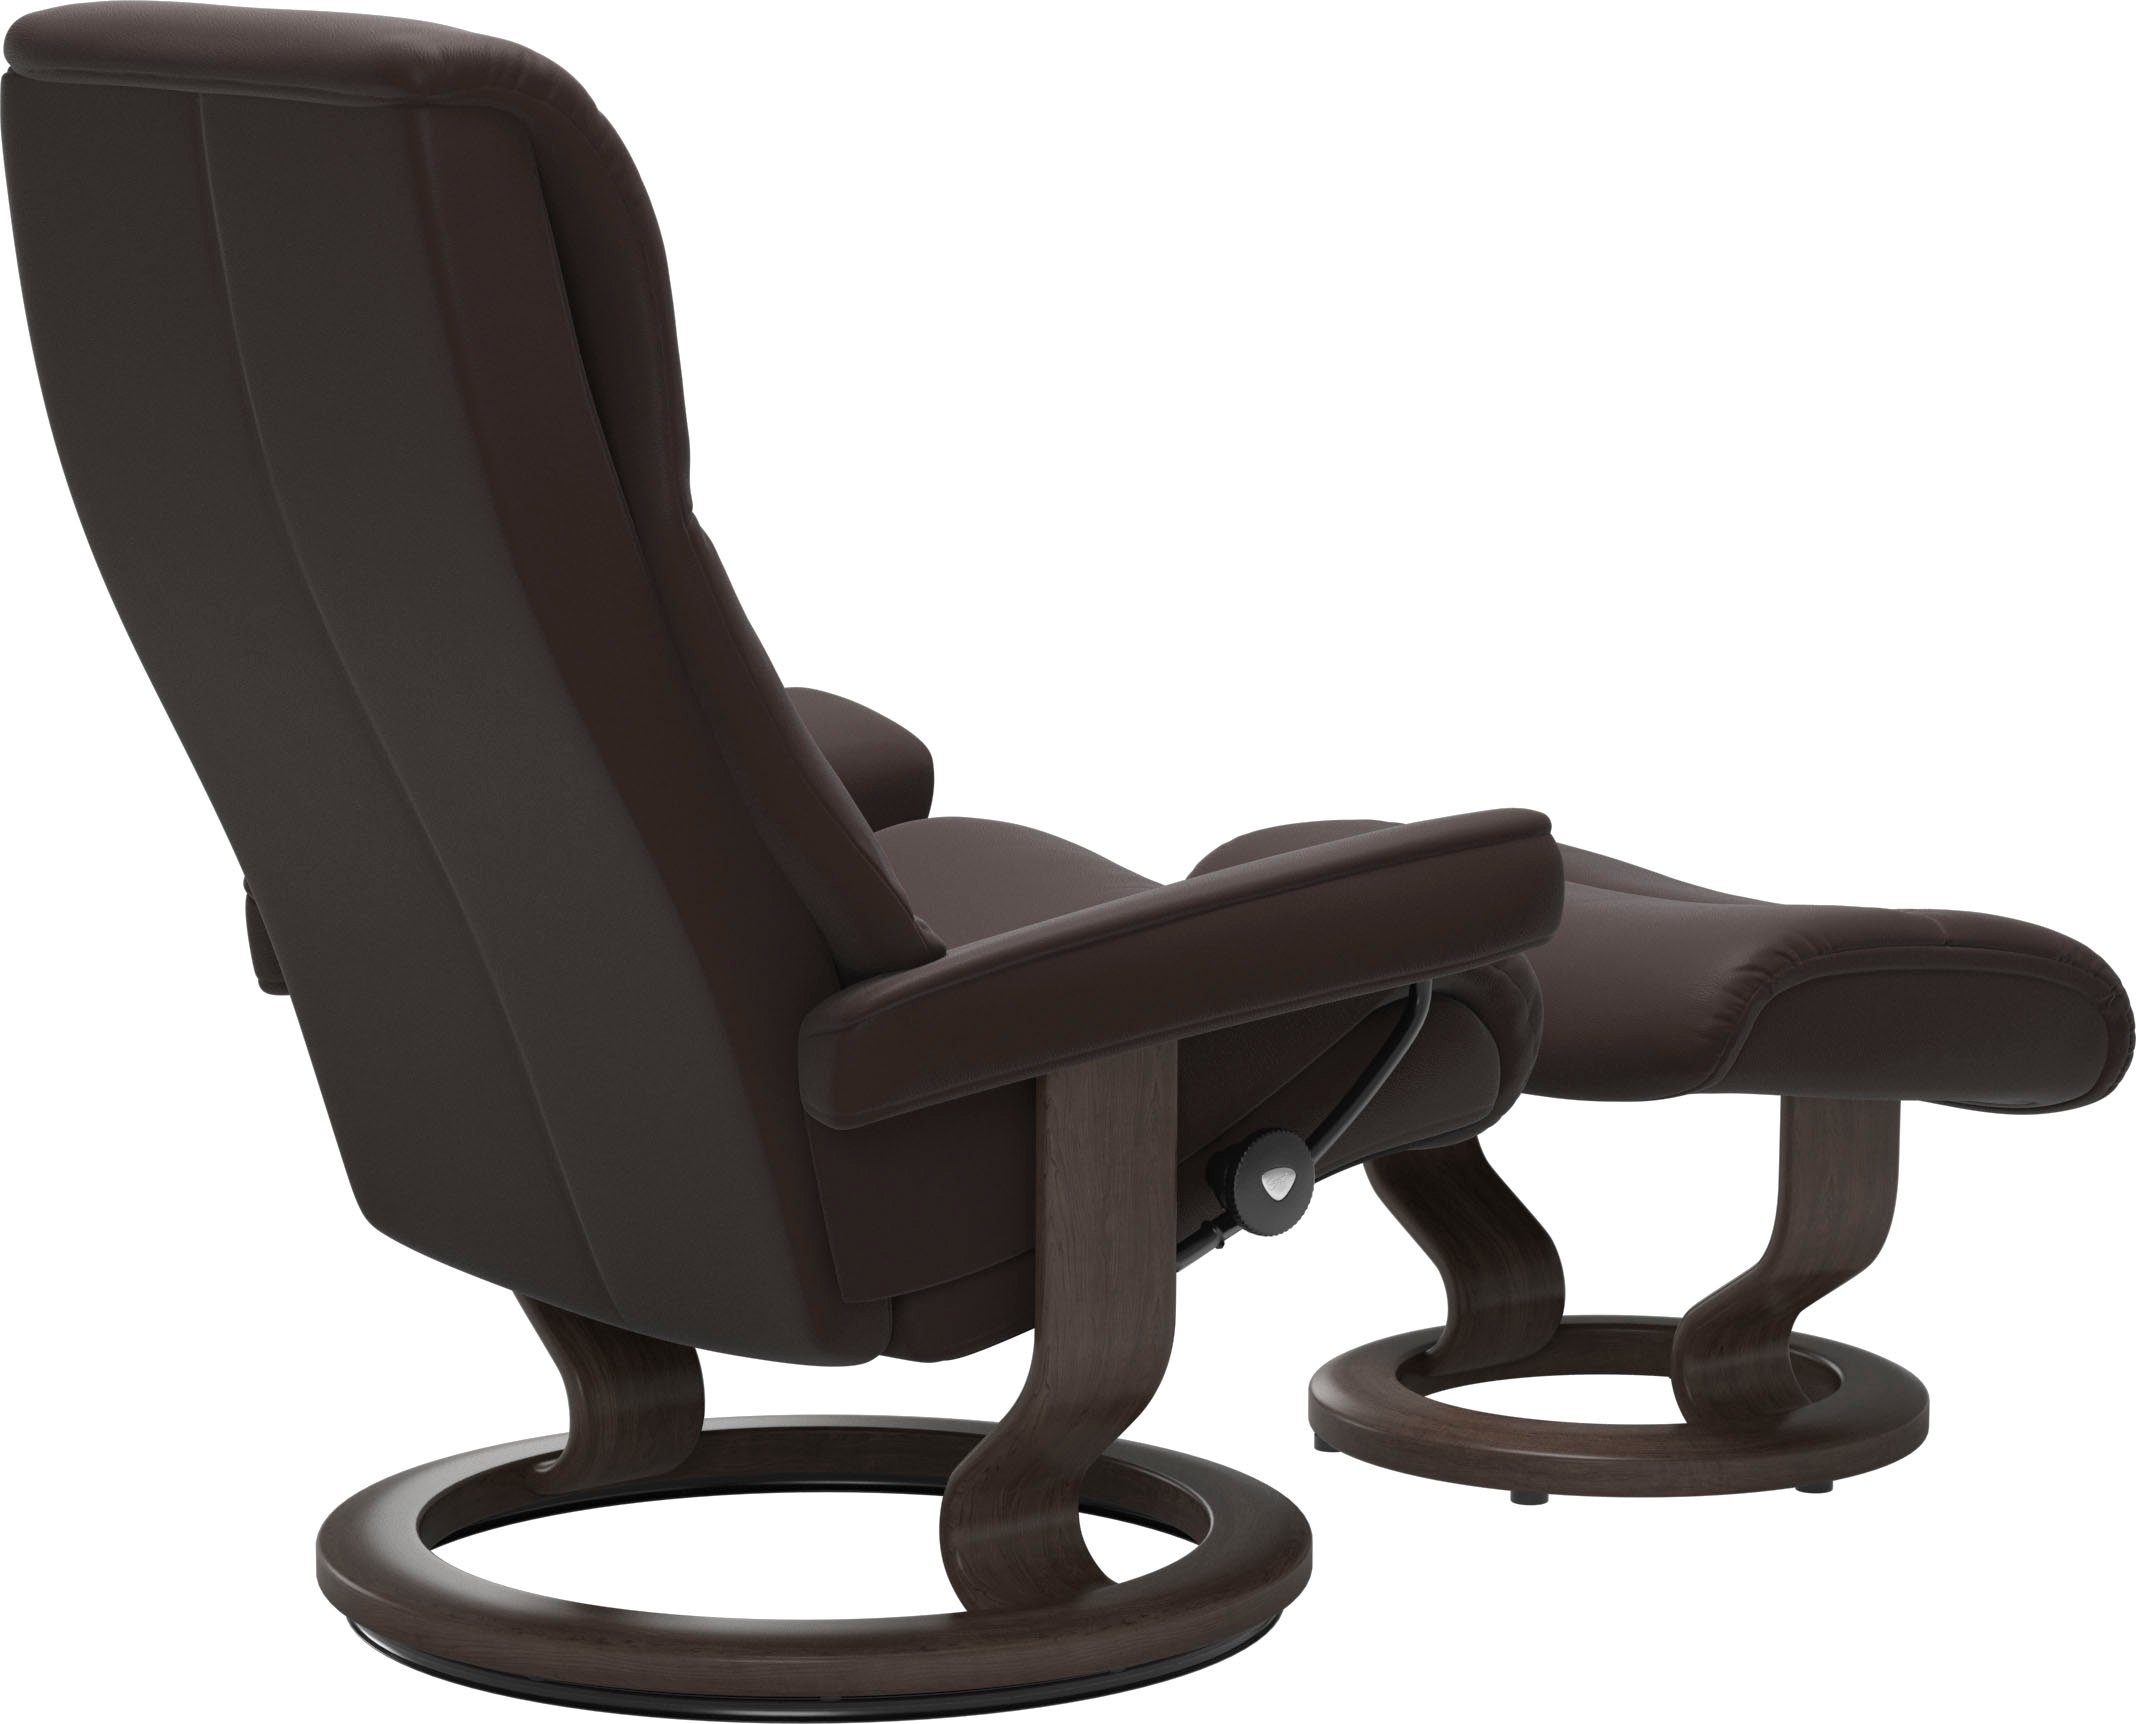 Wenge Größe L,Gestell Base, View, mit Classic Relaxsessel Stressless®